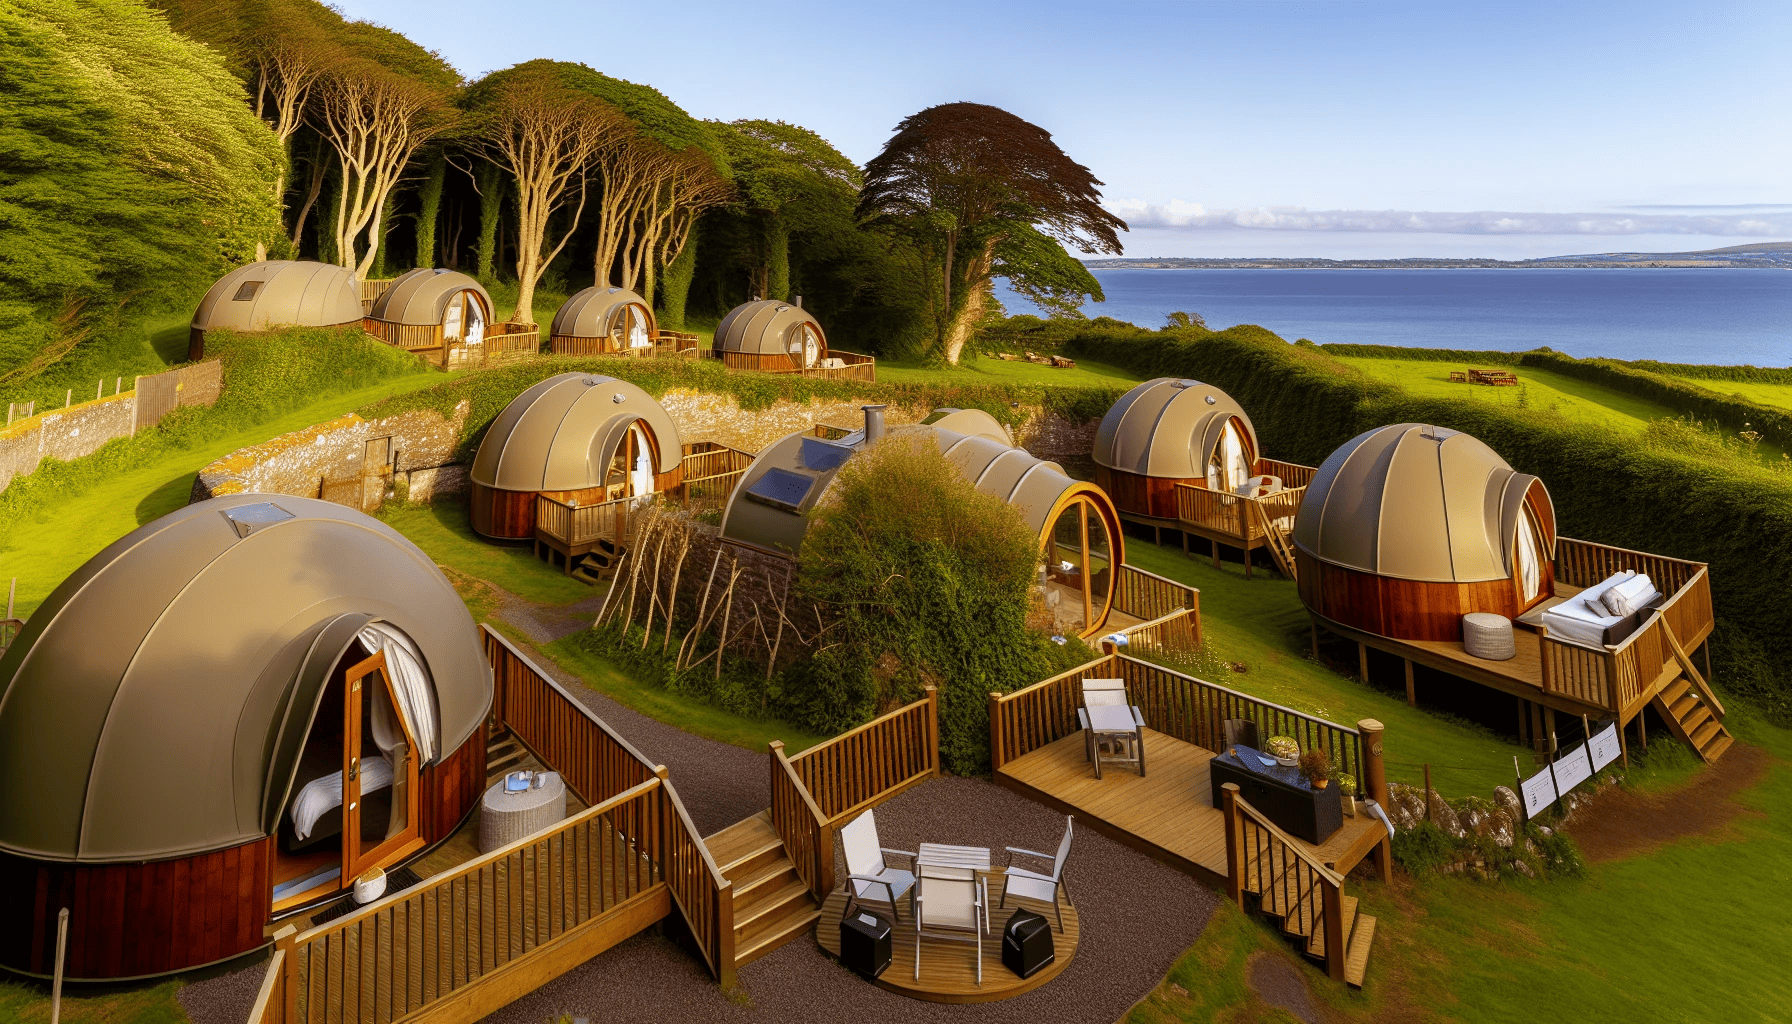 Luxurious glamping pods with sea views at Glenarm Castle